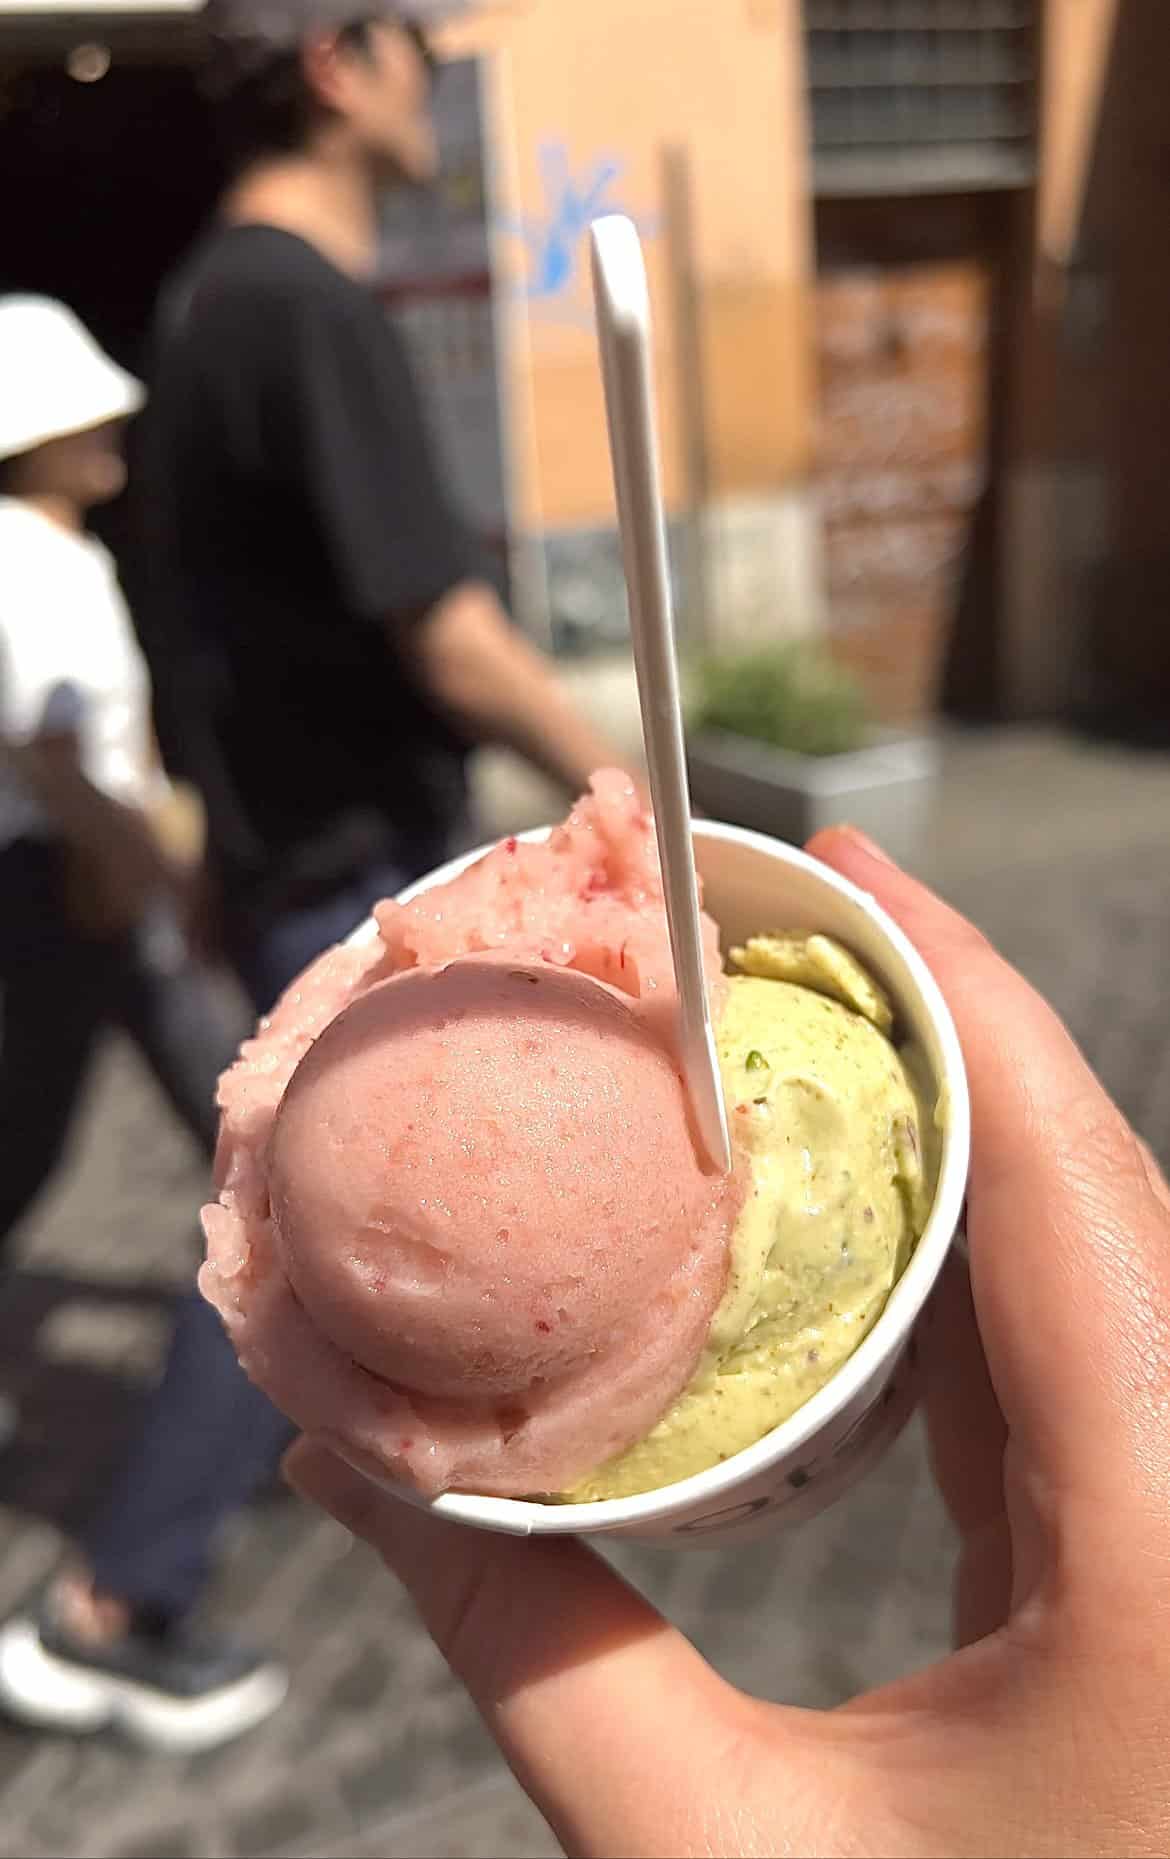 An image of an ice cream cup filled with peach and pistachio gelato from Otaleg in Trastevere, Rome. The scone is held by a female hand in the foreground, while a Roman streetscape and people walking are in the background. 